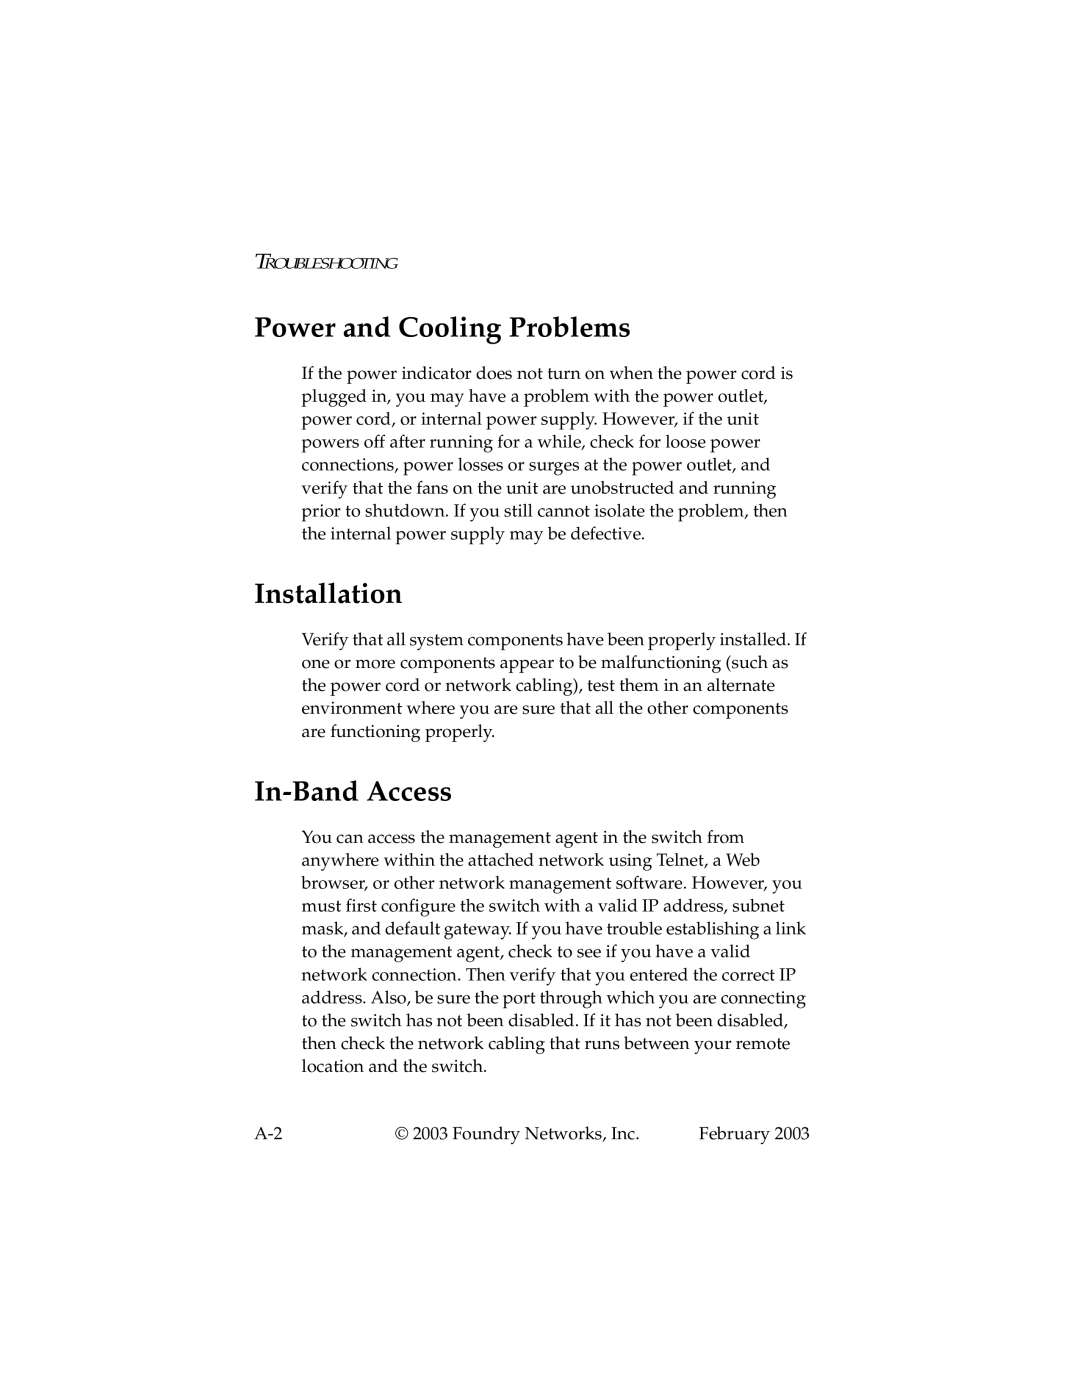 Foundry Networks 2402CF manual Power and Cooling Problems, Installation, In-Band Access 